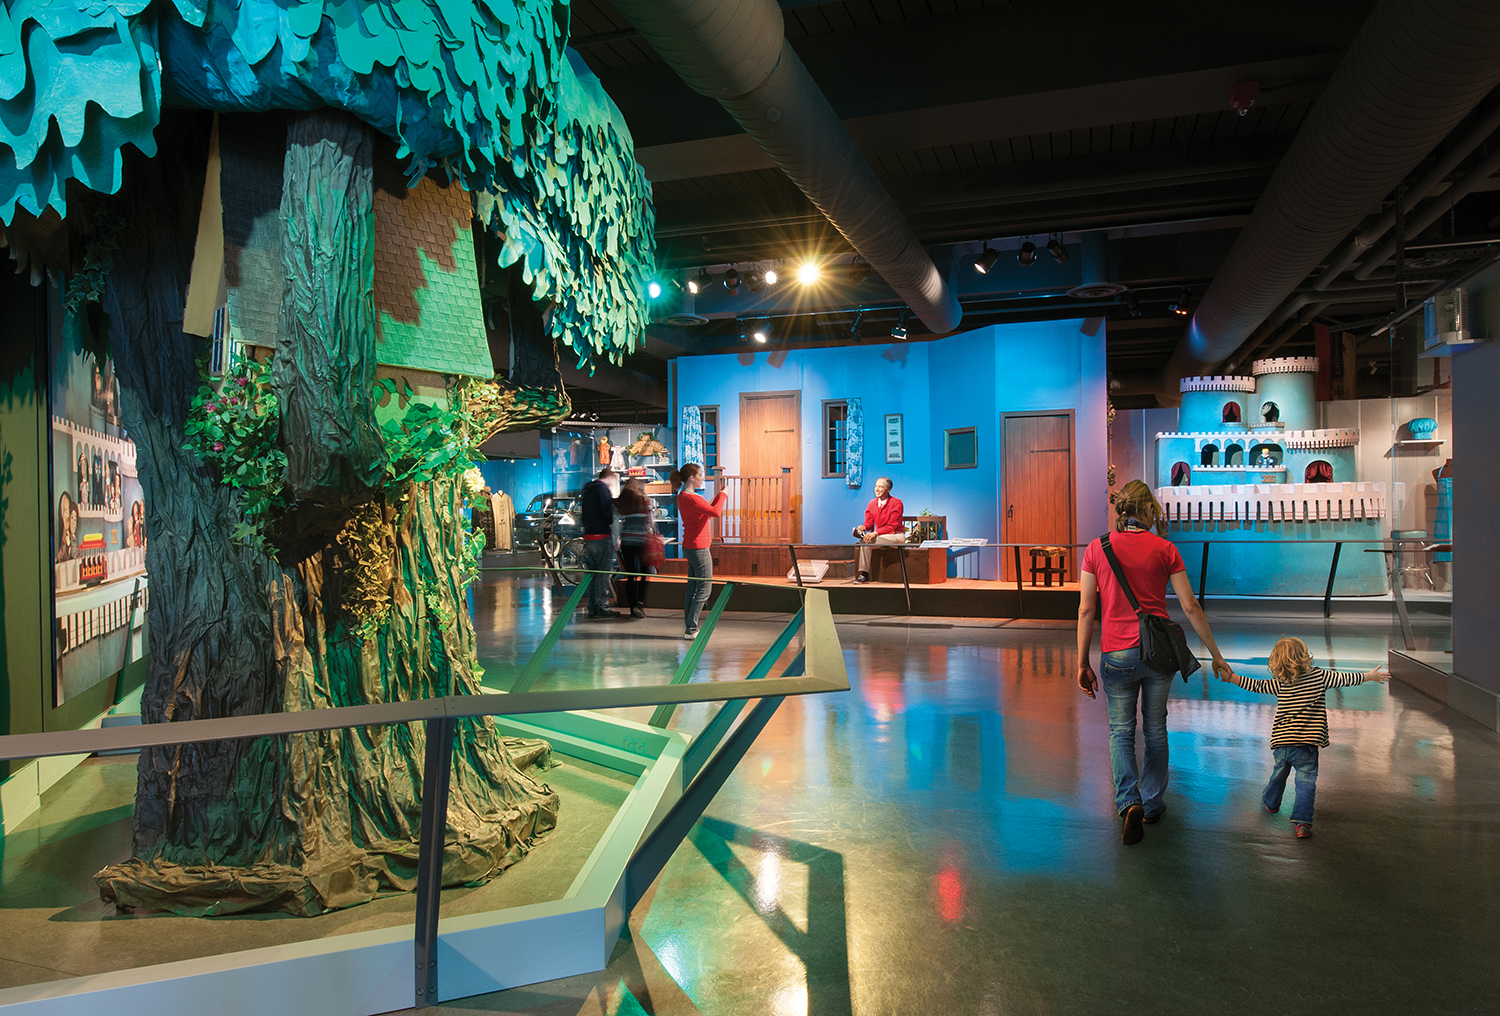 The original set from "Mister Rogers' Neighborhood" is on display in the museum's Special Collections Gallery.